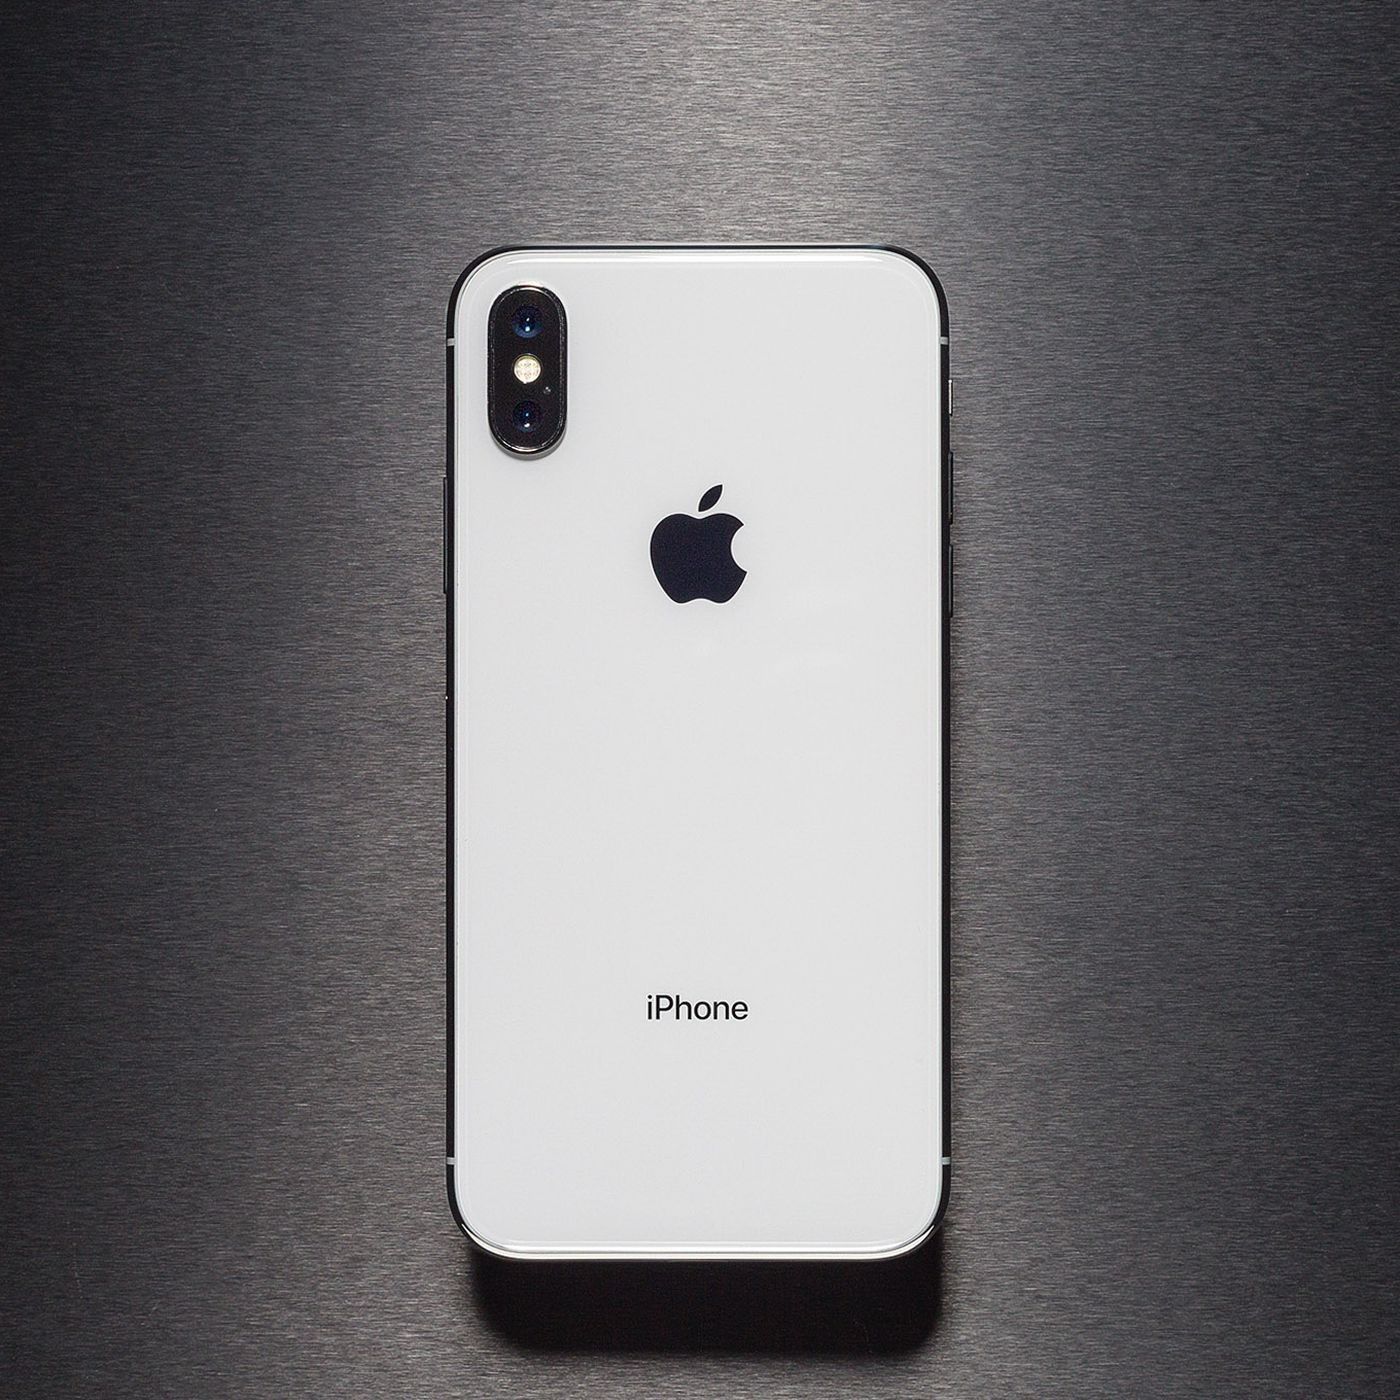 iPhone X (64gb) comes with charger and 1 month Warranty